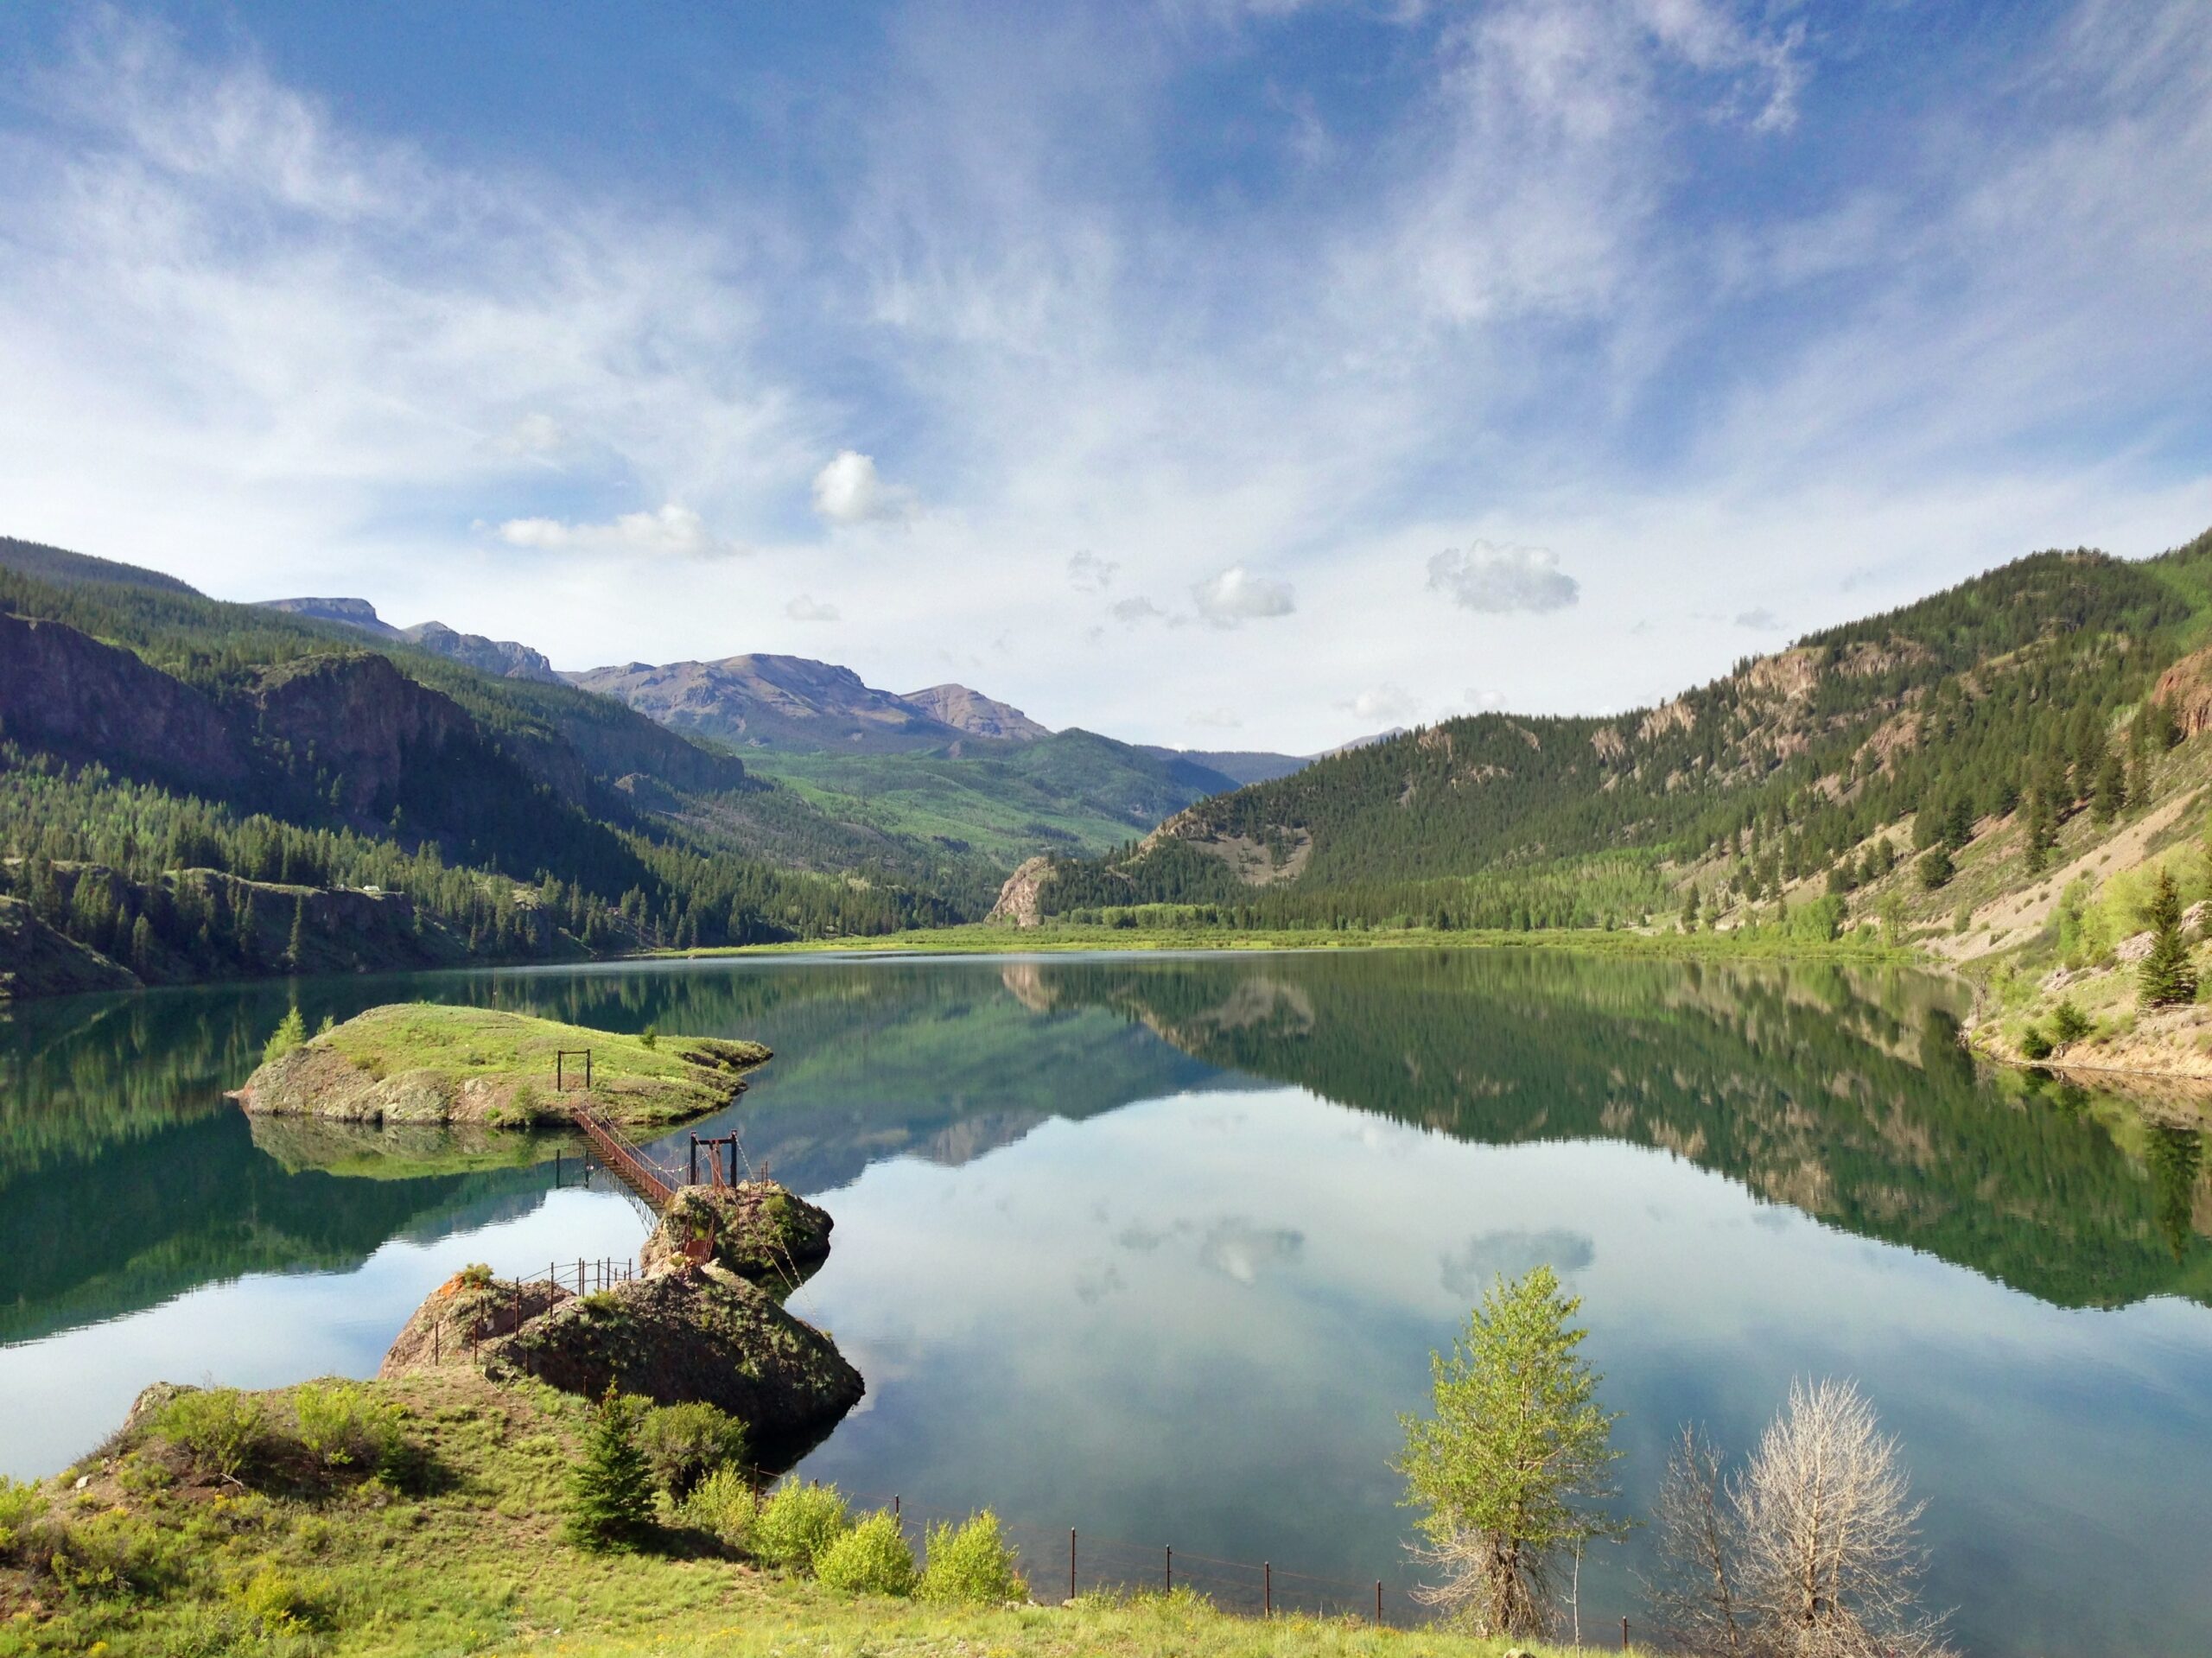 Located in the San Juan Mountains at an elevation of 9,003 feet, Lake San Cristobal is the second-largest natural lake in Colorado. In June, 2021, we cut the ribbon on this project, which will increase and improve public access to the lake, including ADA access.